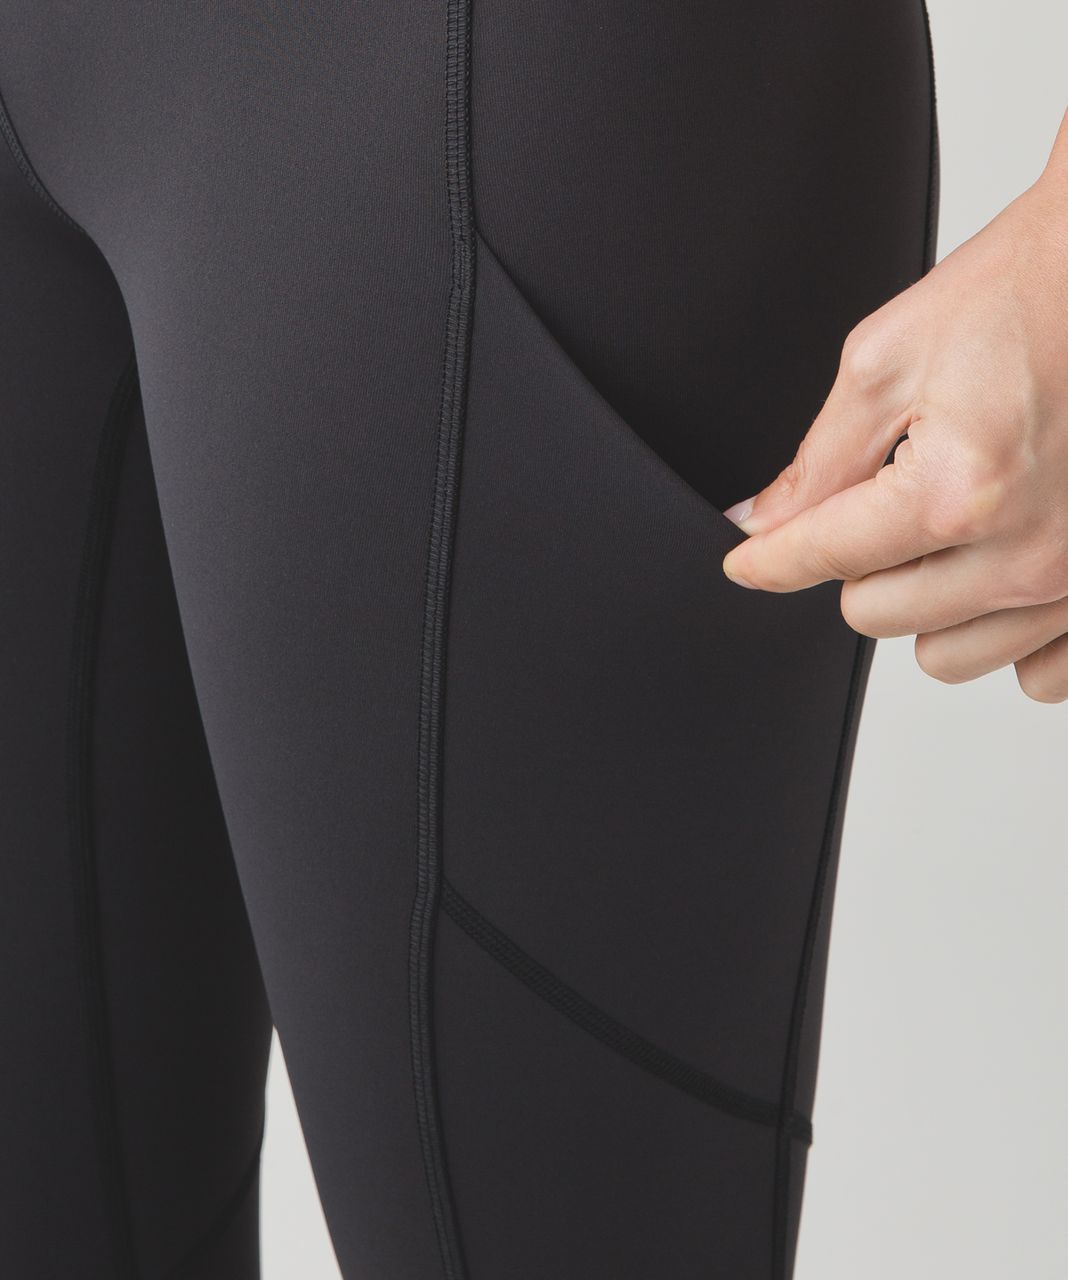 LULULEMON, SPEED TIGHT IV Mesh, Ruched Ankle, Dual Hip Pockets, Blk Size 4  $20.50 - PicClick